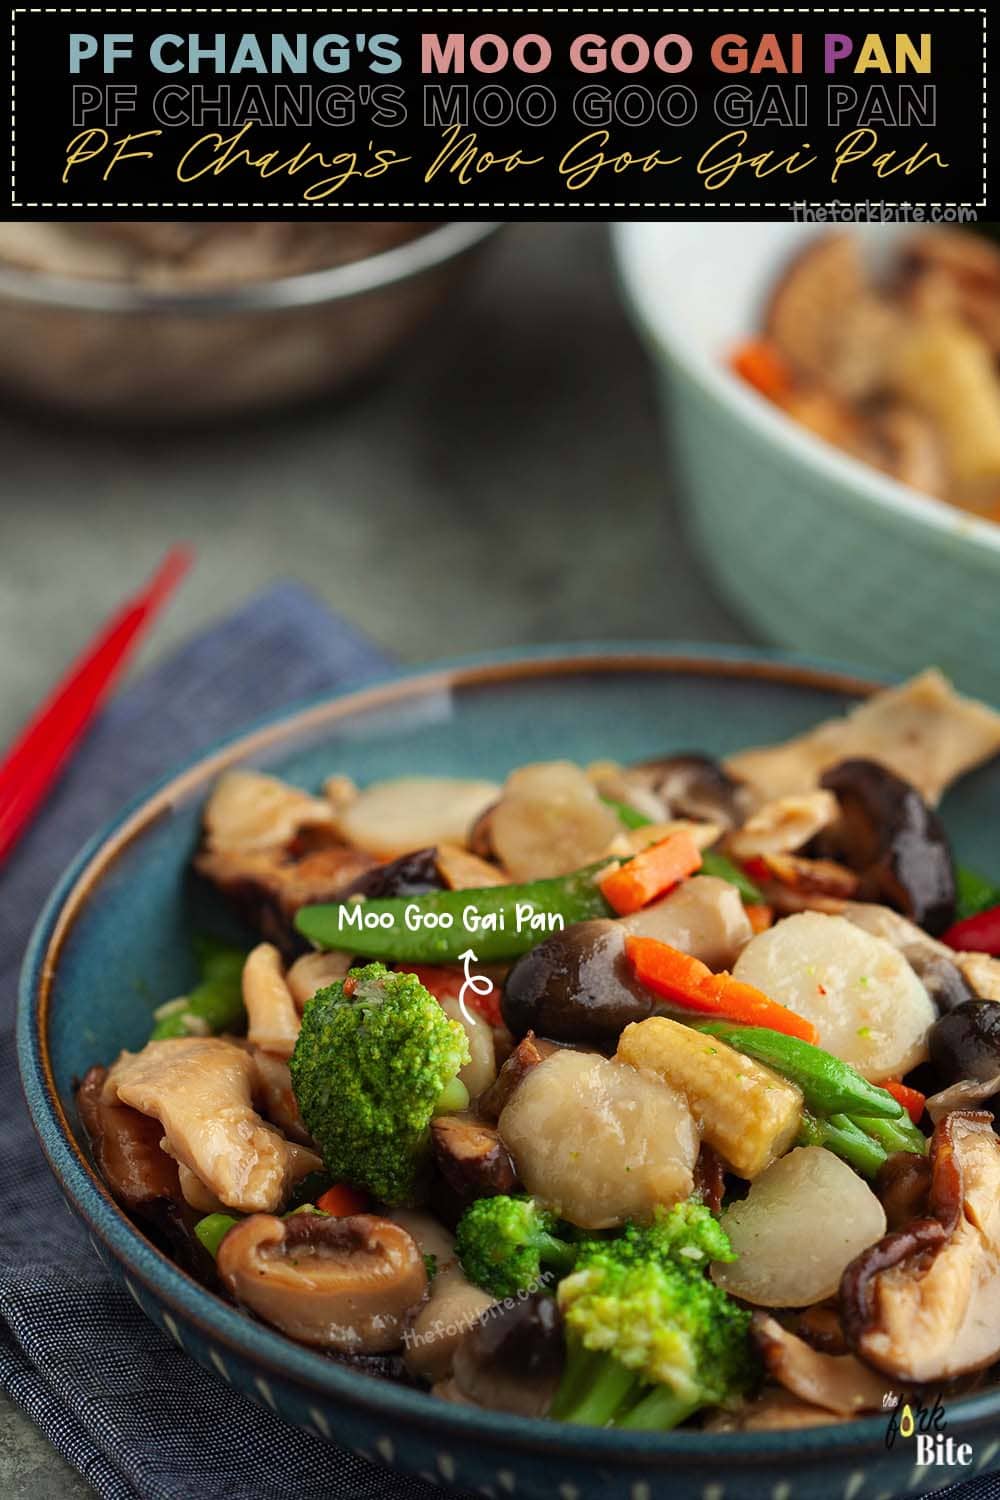 This PF Changs Moo Goo Gai Pan copycat recipe is a yummy combination of chicken meat and mushrooms, stir-fried with a delicate, clear, tasty sauce.